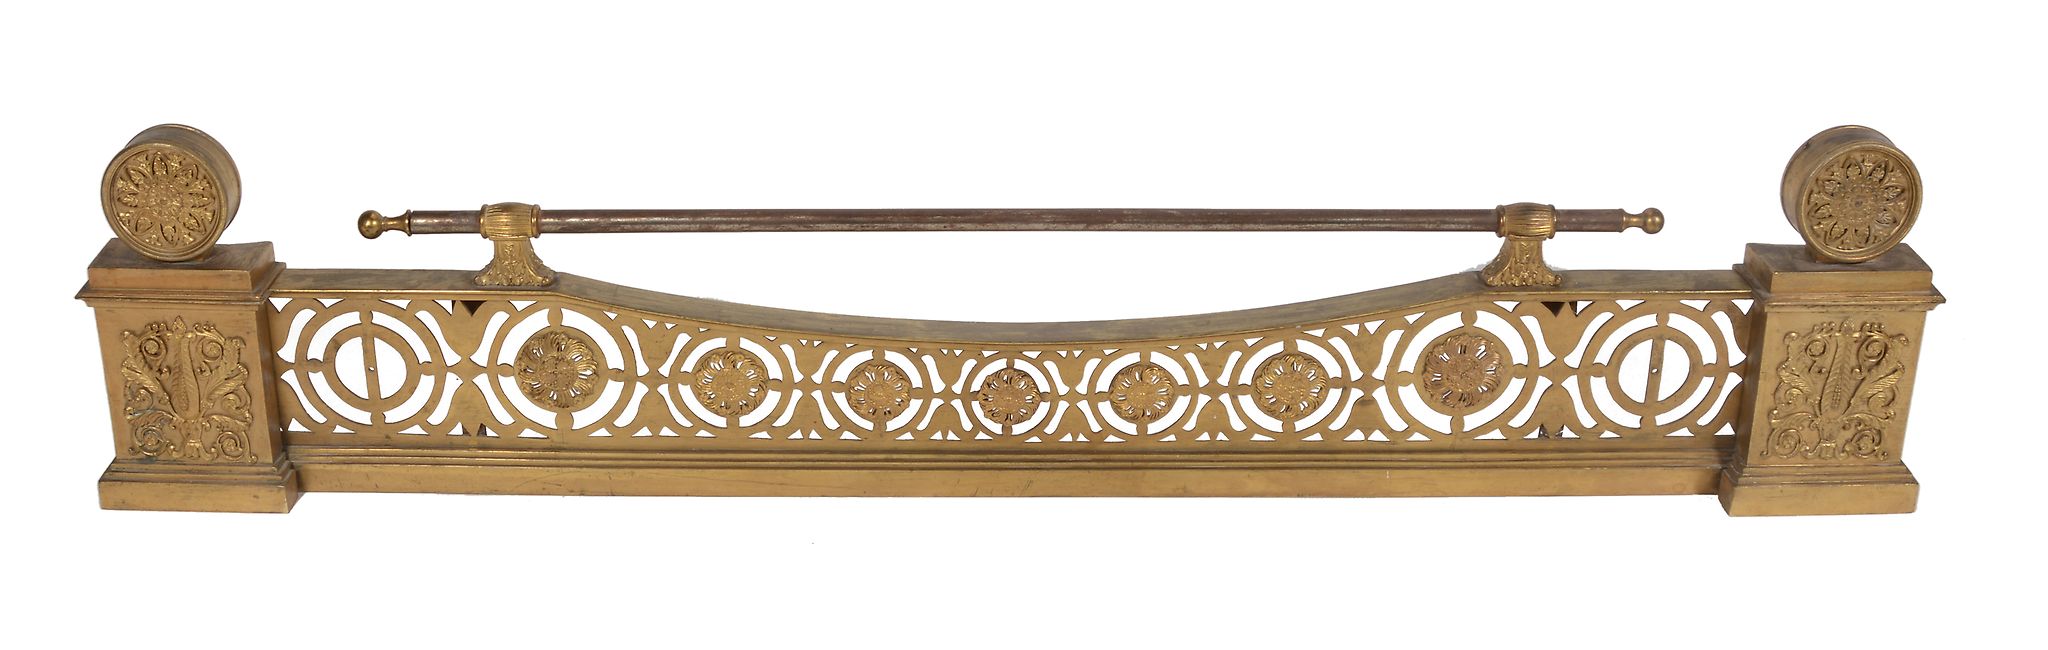 An Empire gilt bronze and iron mounted adjustable fender, early 19th century  An Empire gilt